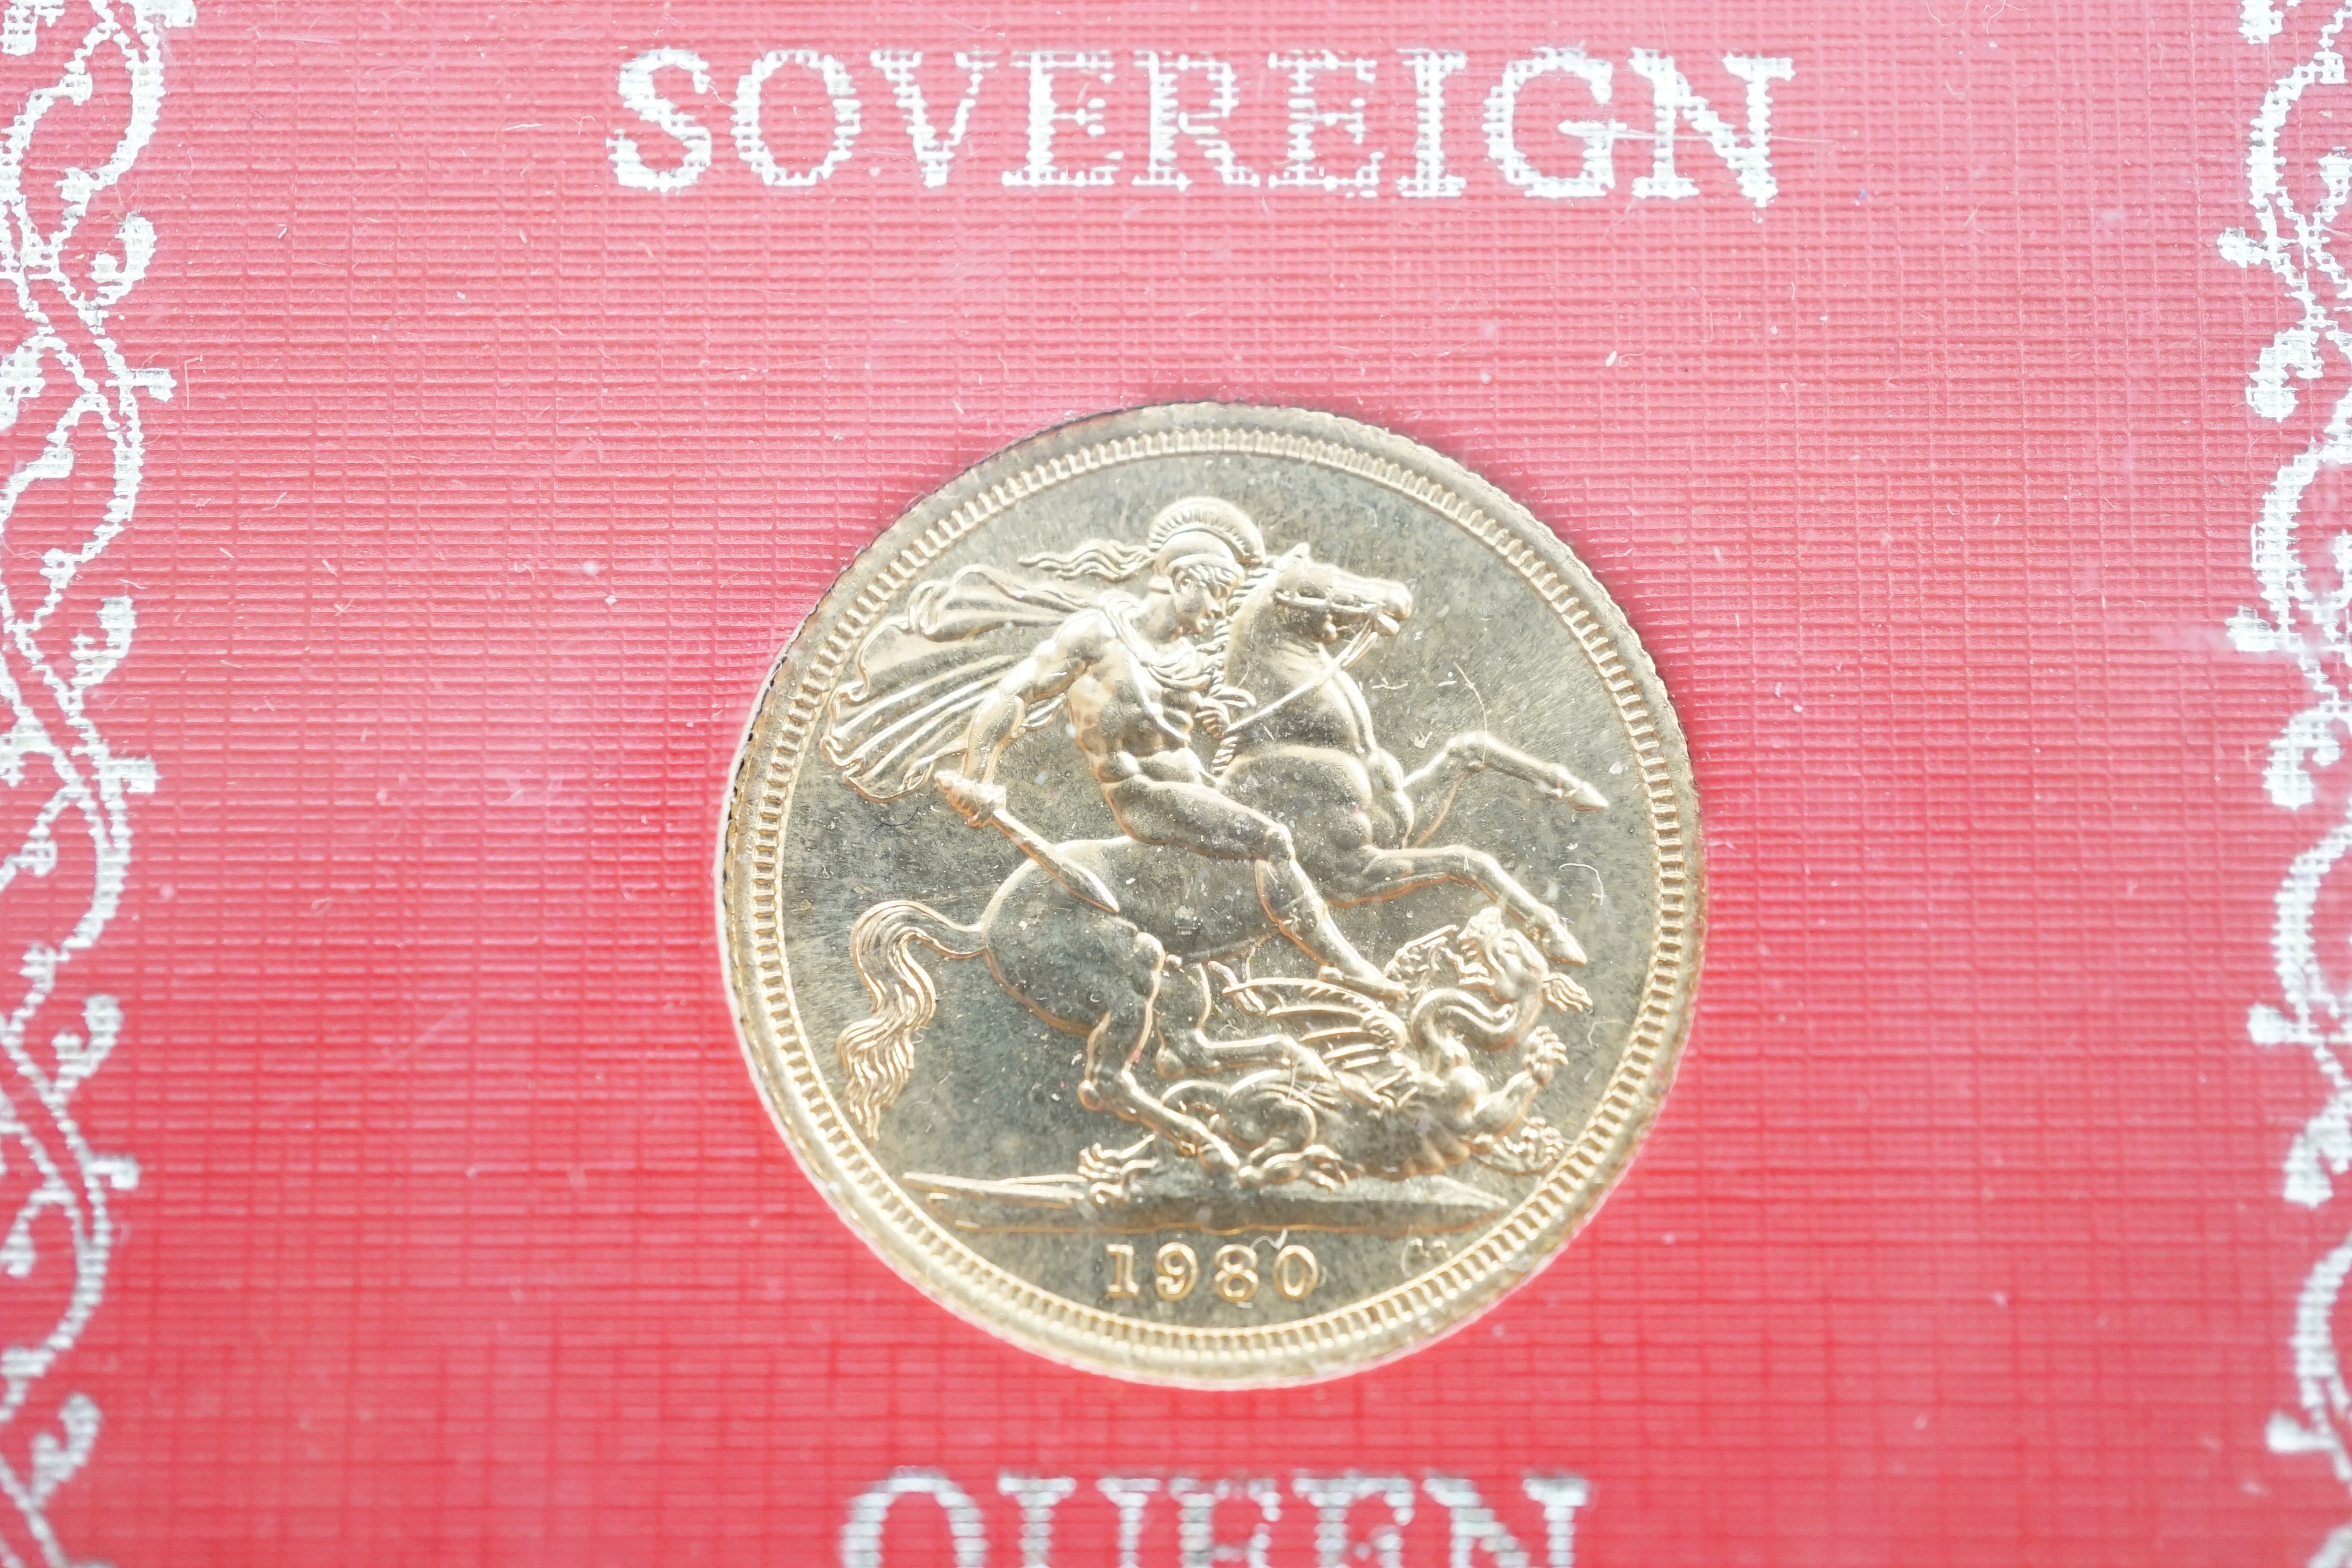 British gold coins, Elizabeth II, 1980 gold sovereign in case of issue, BUNC and a 1982 gold proof half sovereign, in case of issue with certificate